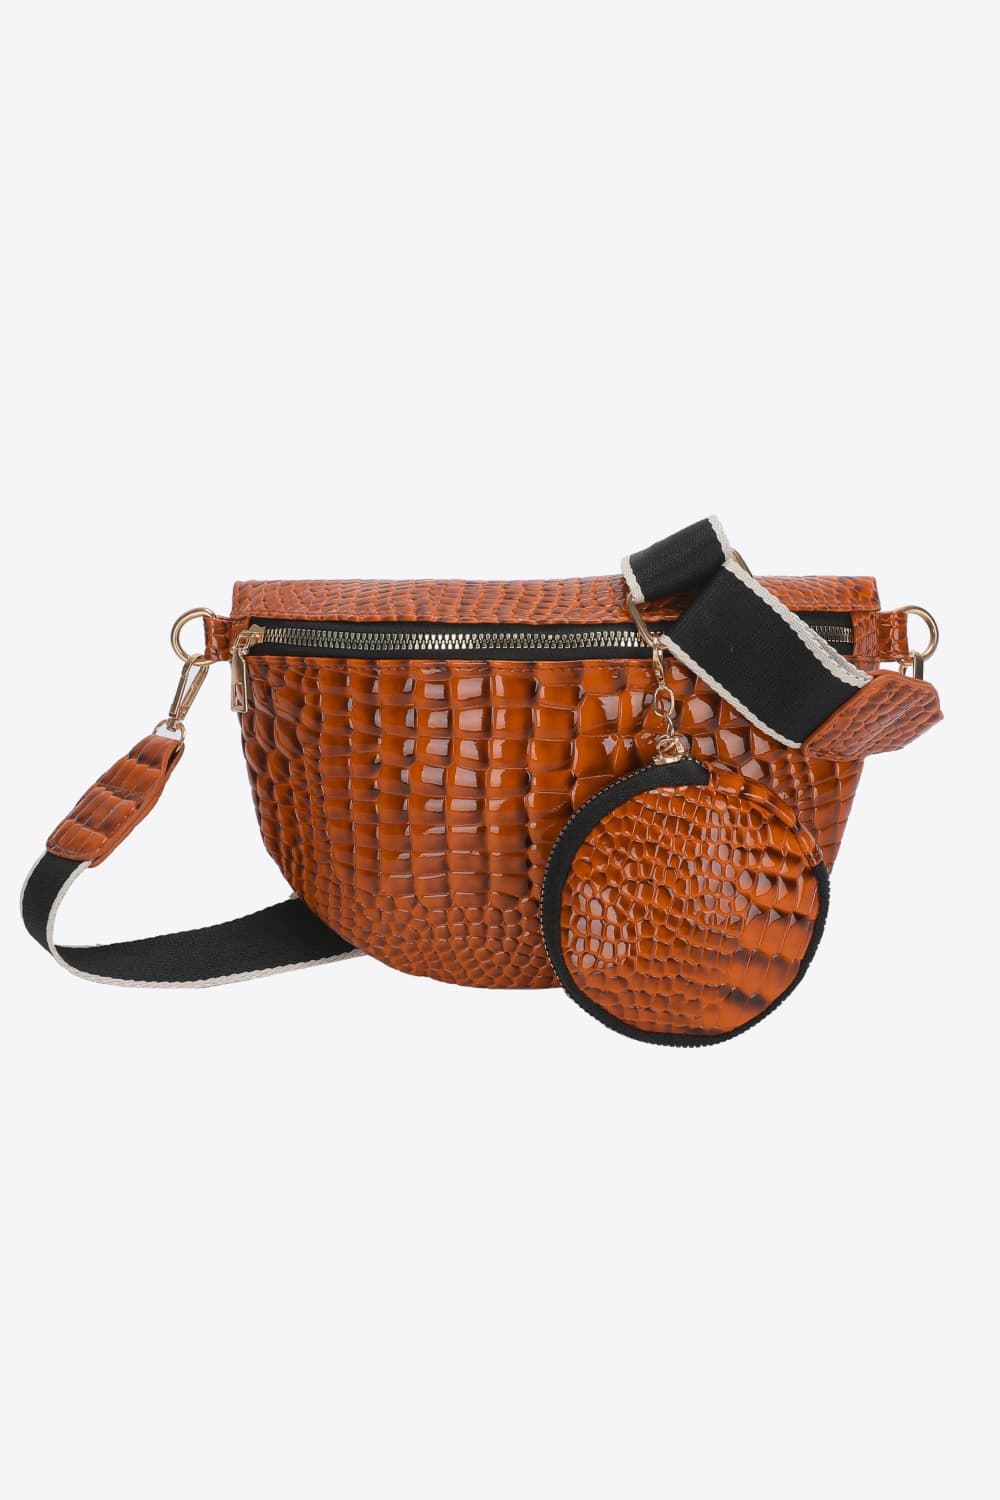 PU Leather Sling Bag with Small Purse | Sugarz Chique Boutique